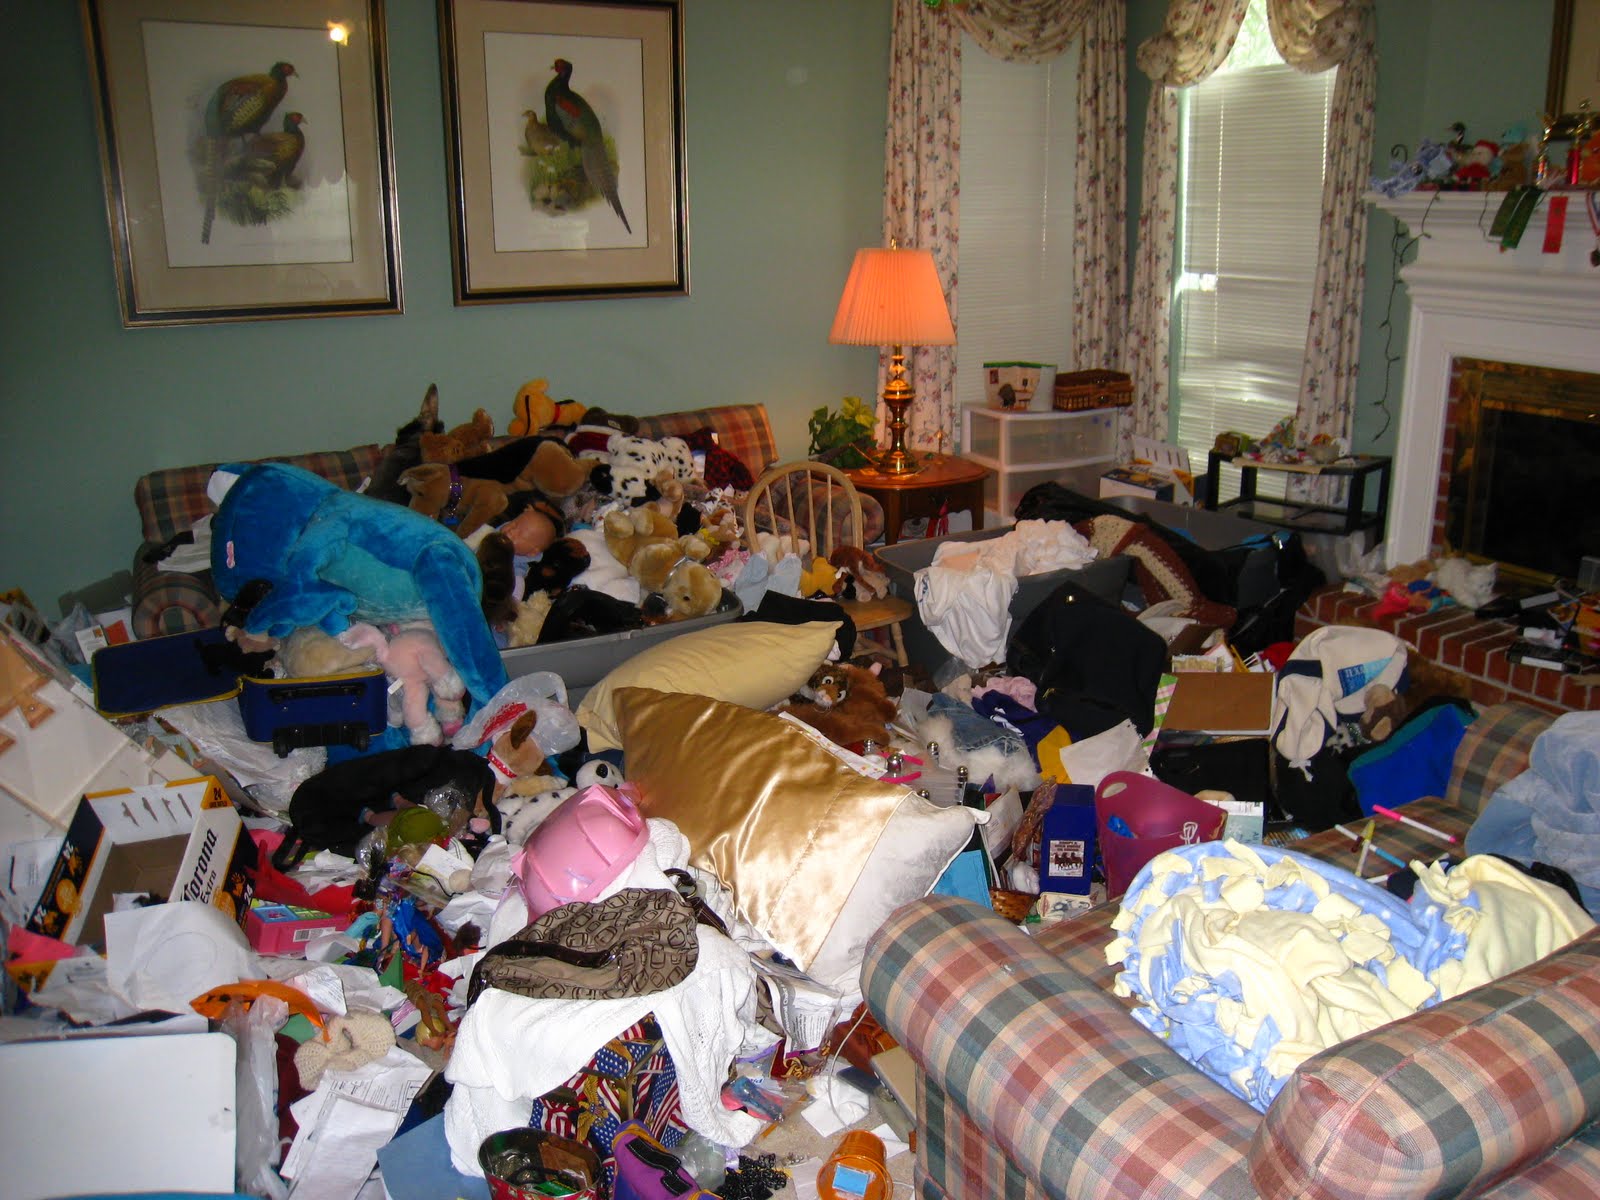 Extreme Hoarding Gone Too Far?